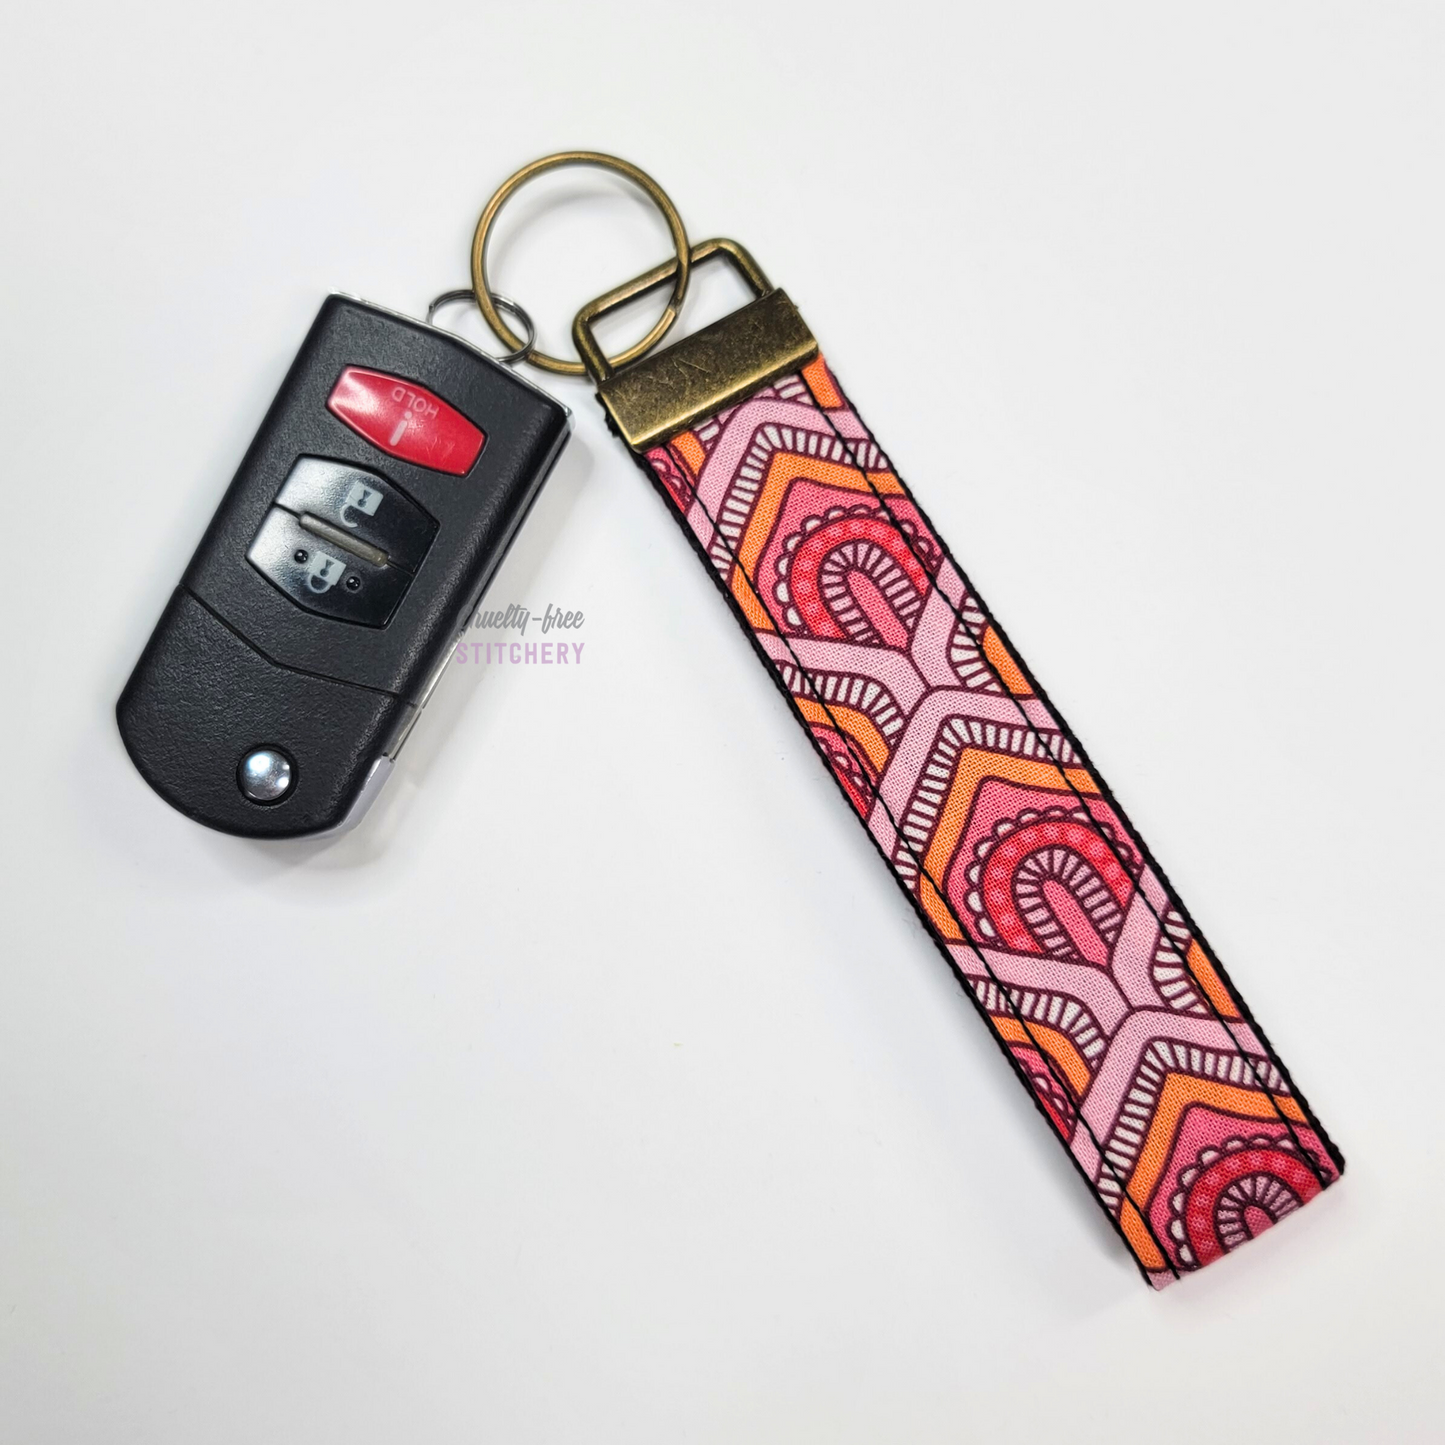 Pink and orange scales print key fob wristlet attached to a car key for scale. The car key is the fold-away type and is about half as long as the strap.